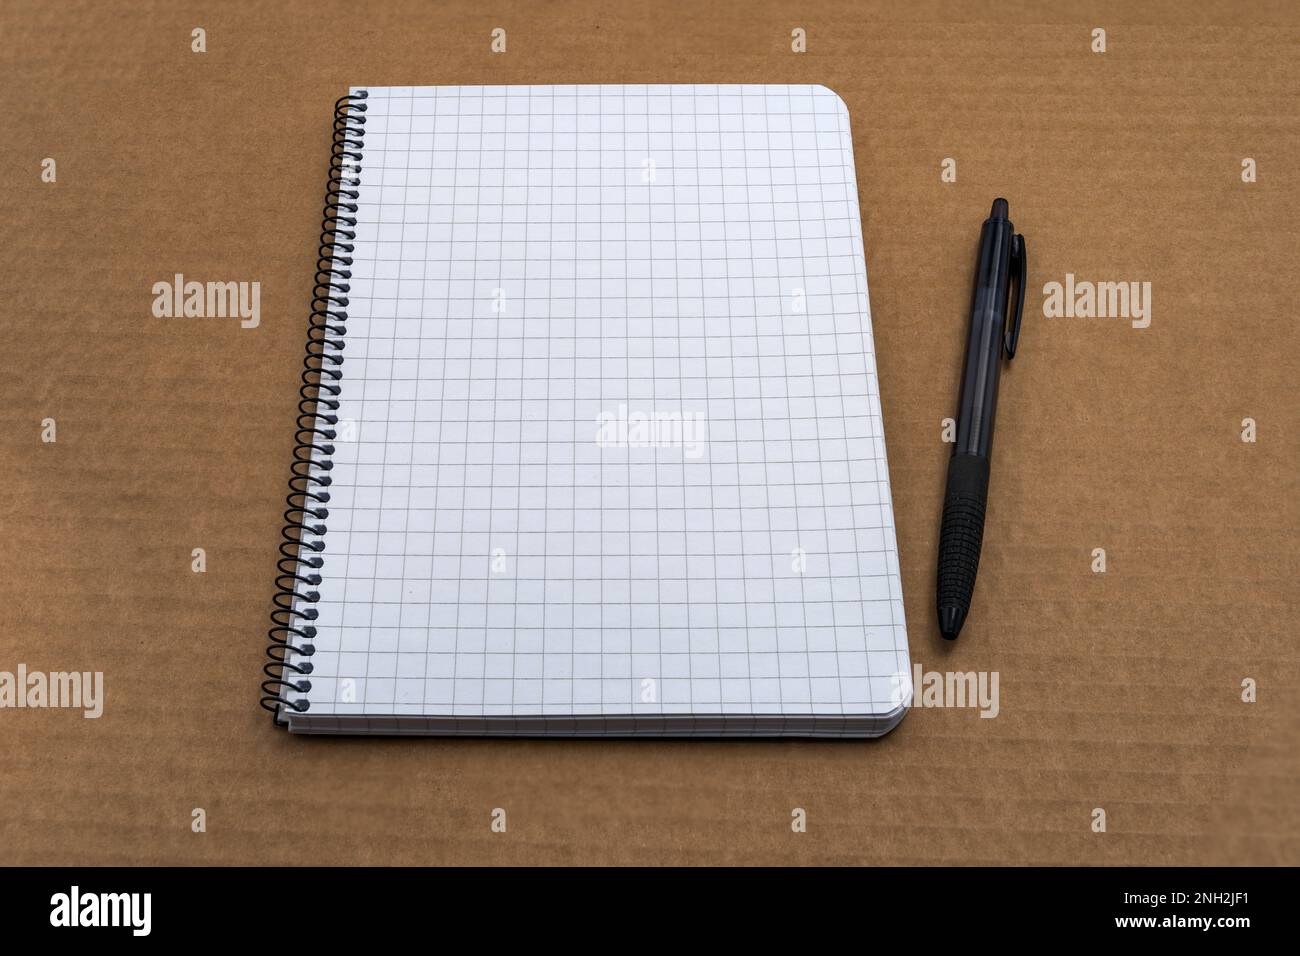 Graph paper spiral Notebook with black ballpoint pen on top of brown cardboard Stock Photo